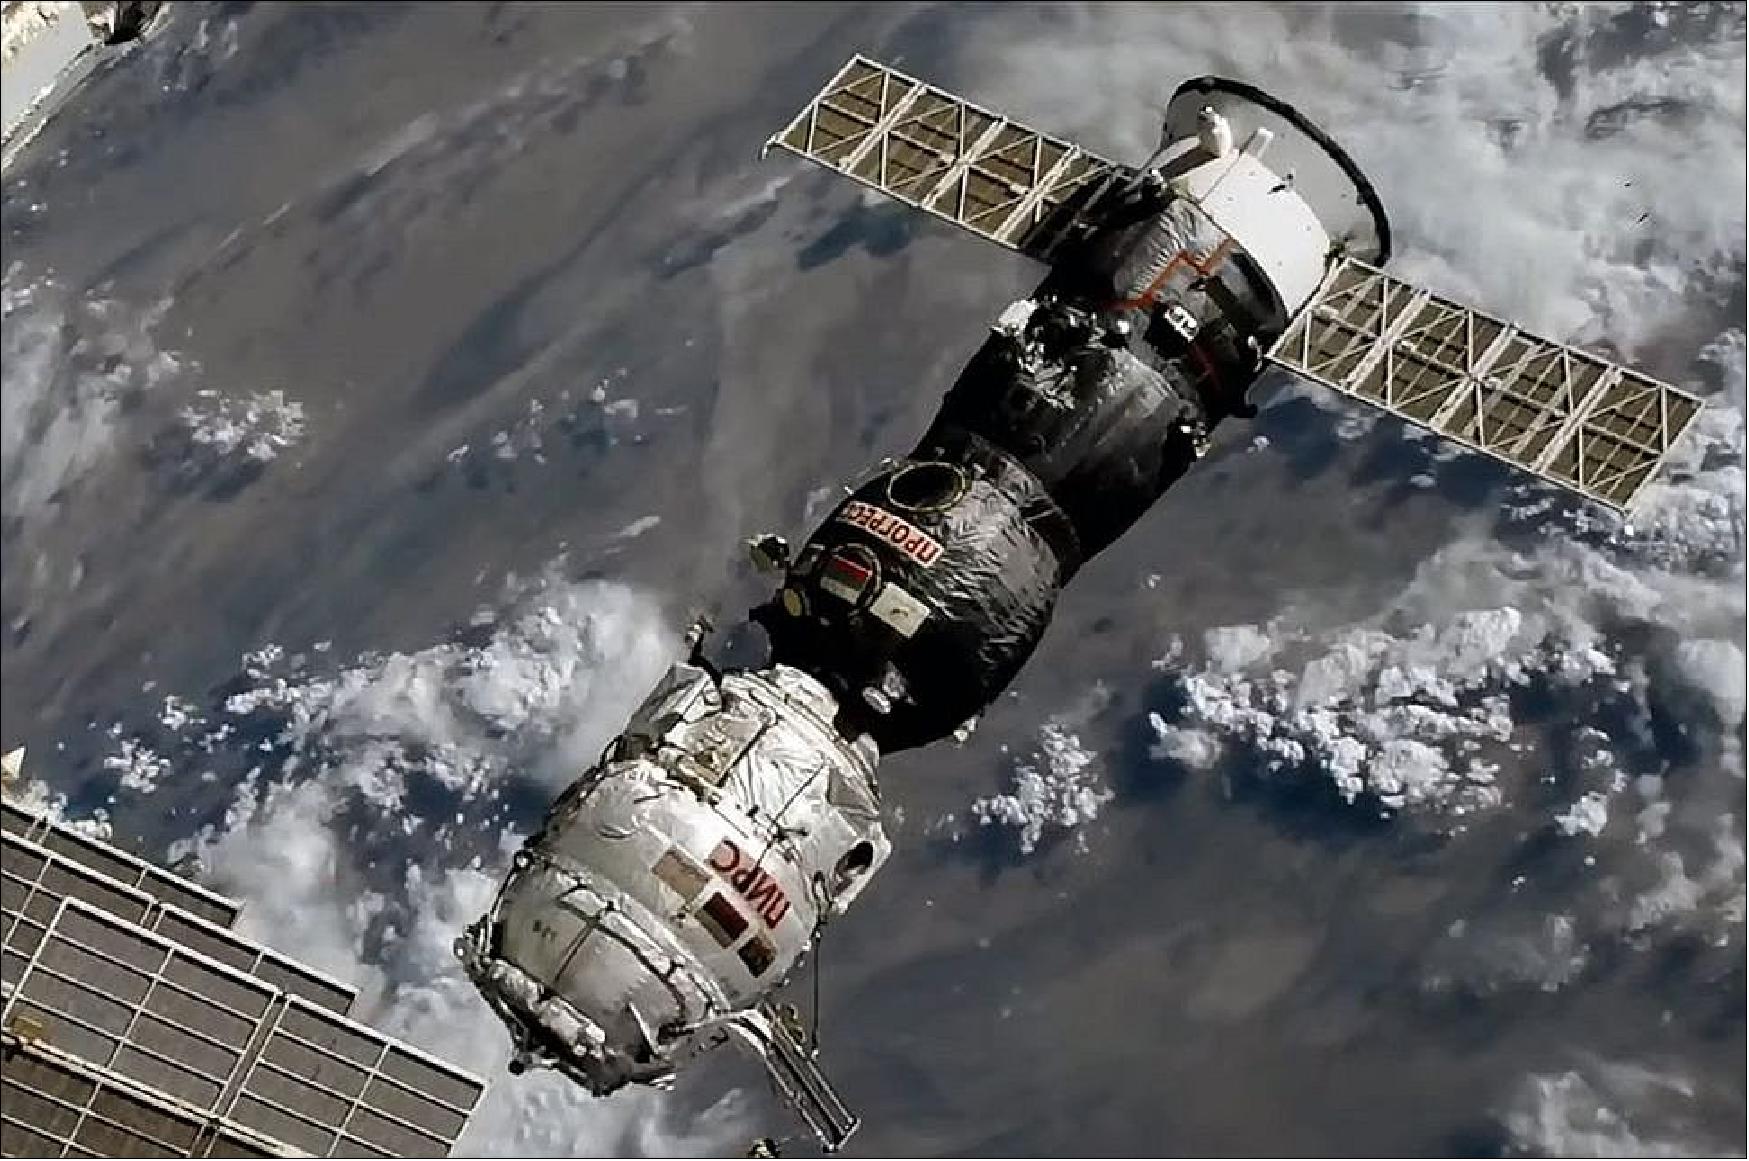 Figure 13: Russia’s Pirs docking compartment, attached to the Progress MS-16 cargo spacecraft, is seen departing from the International Space Station, headed for a destructive reentry on July 26, 2021 (image credit: NASA TV)